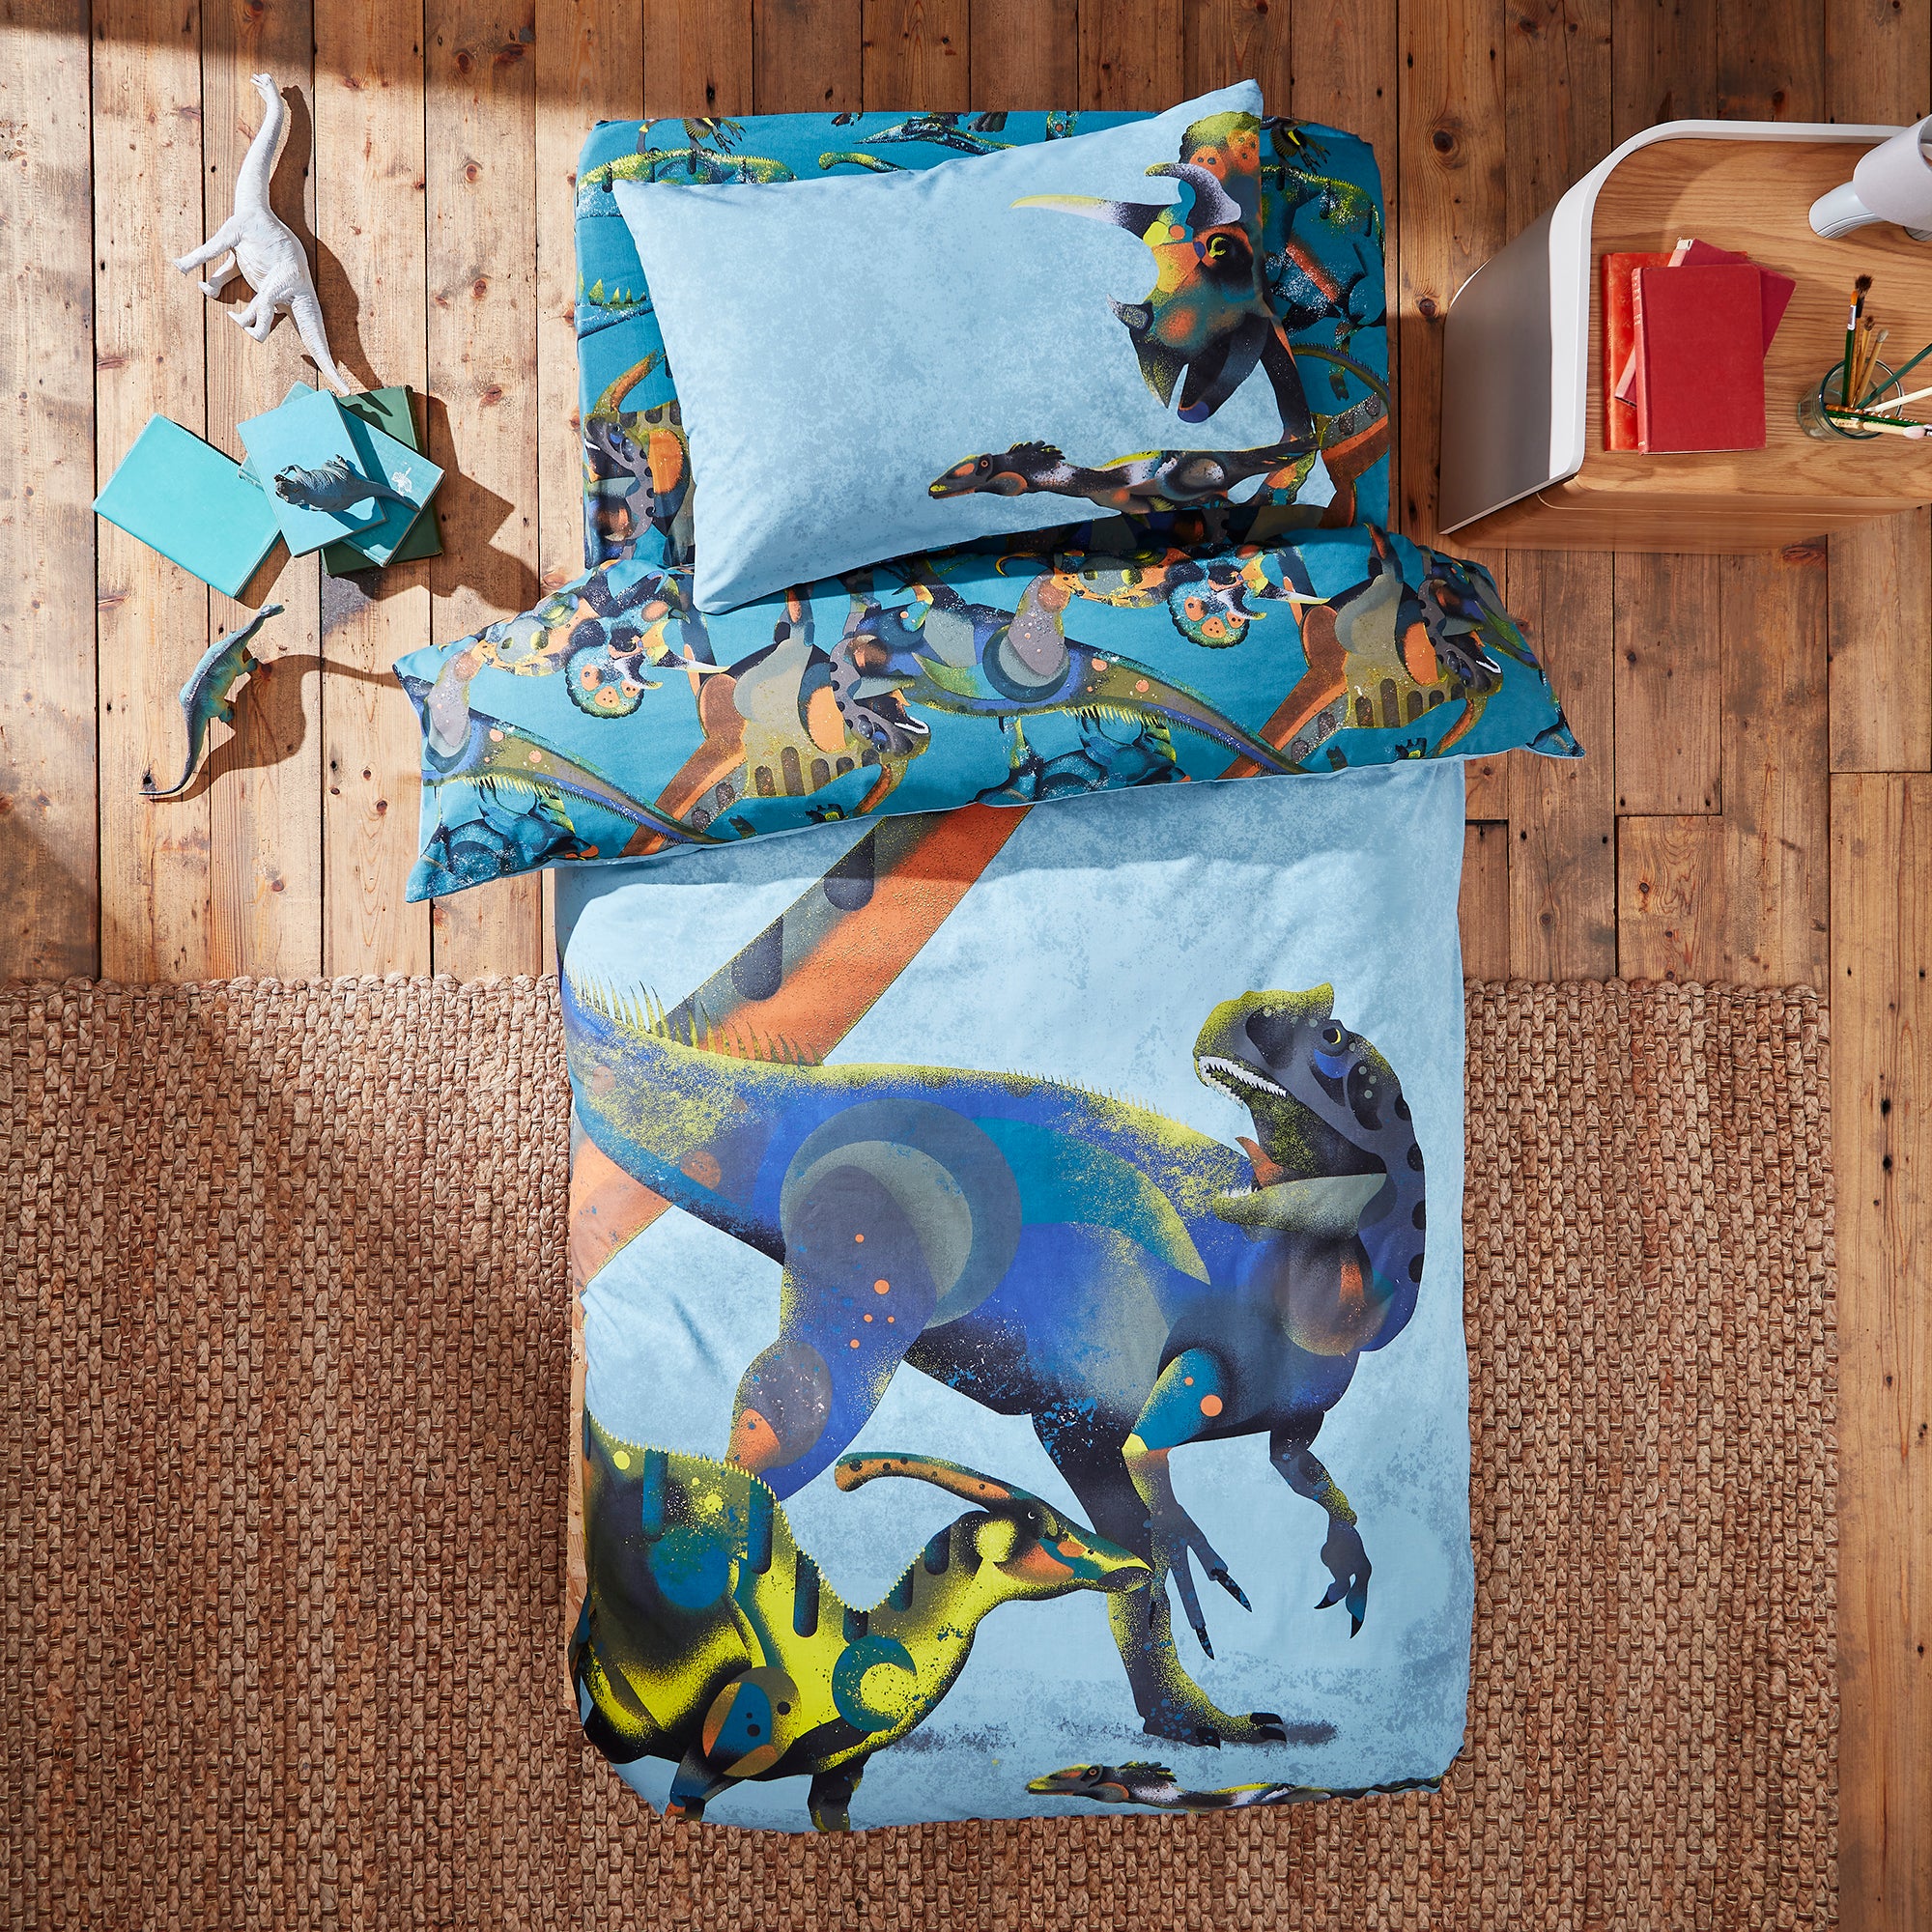 Age of Dinosaurs Duvet Cover and Pillowcase Set